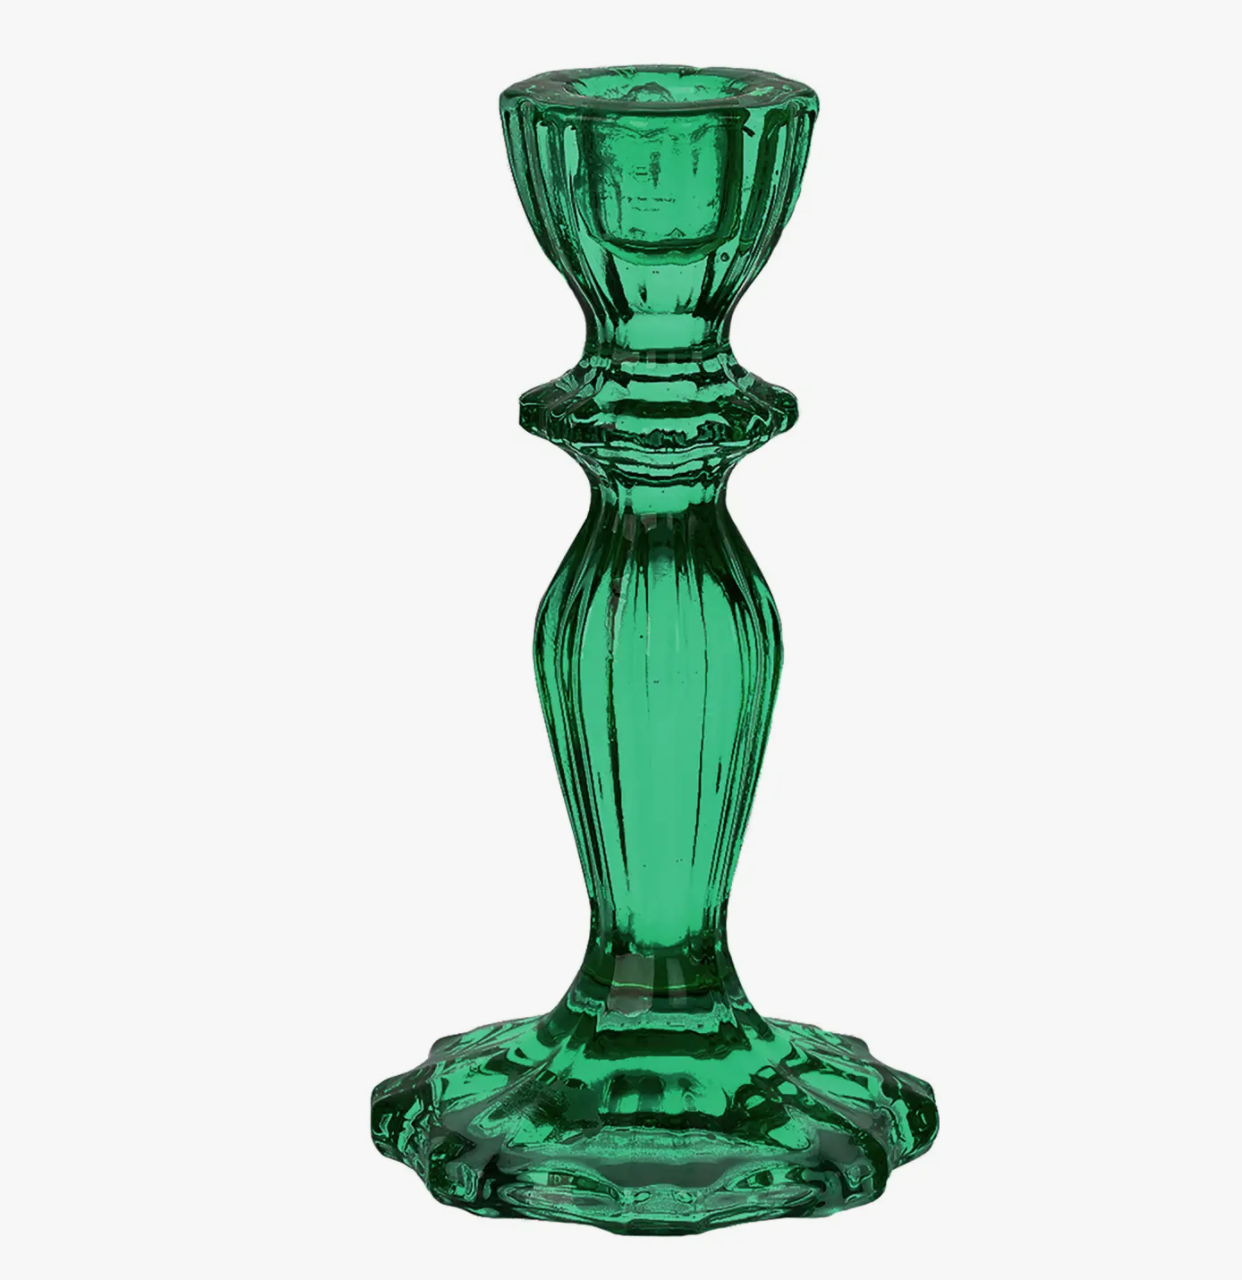 Antique-Style Glass Candle Holder